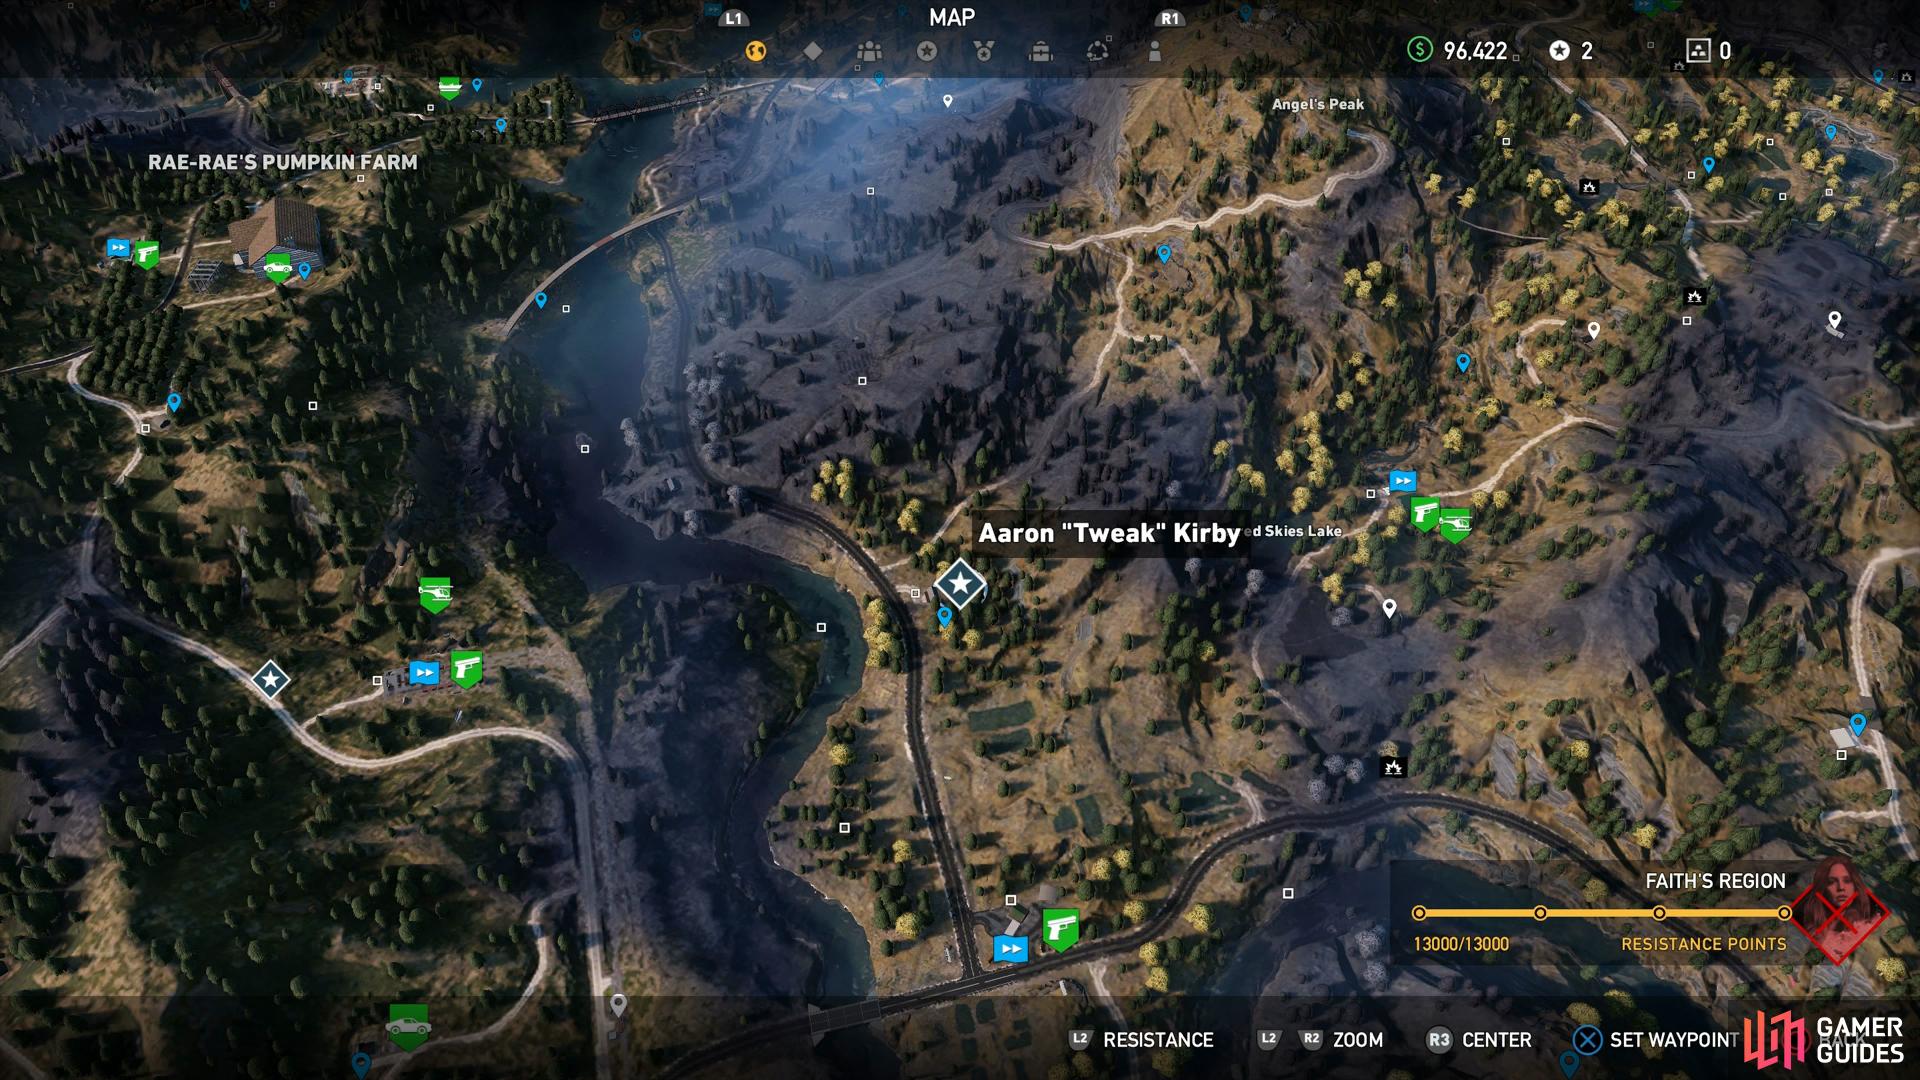 Fast Henbane River Side Missions Far Cry 5 Gamer Guides®